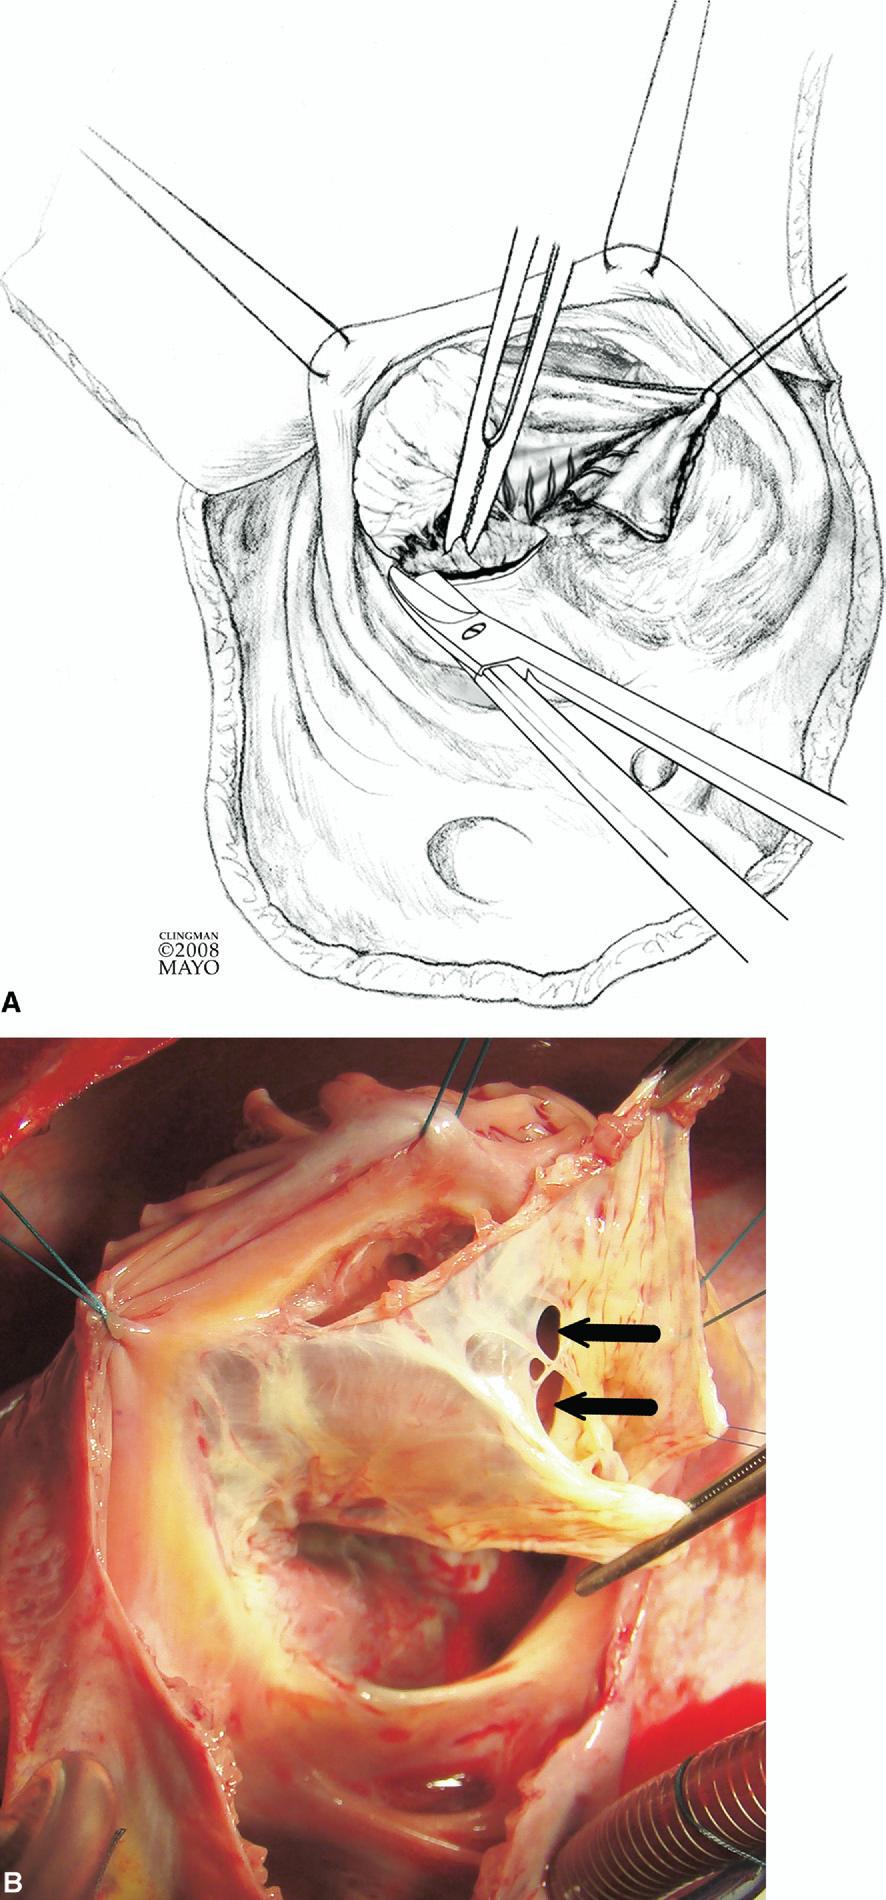 Cone reconstruction of the tricuspid valve for Ebstein s anomaly 115 Figure 6 (A) Dissection is continued with a scissors with the goal of taking down all attachments between the septal leaflet and